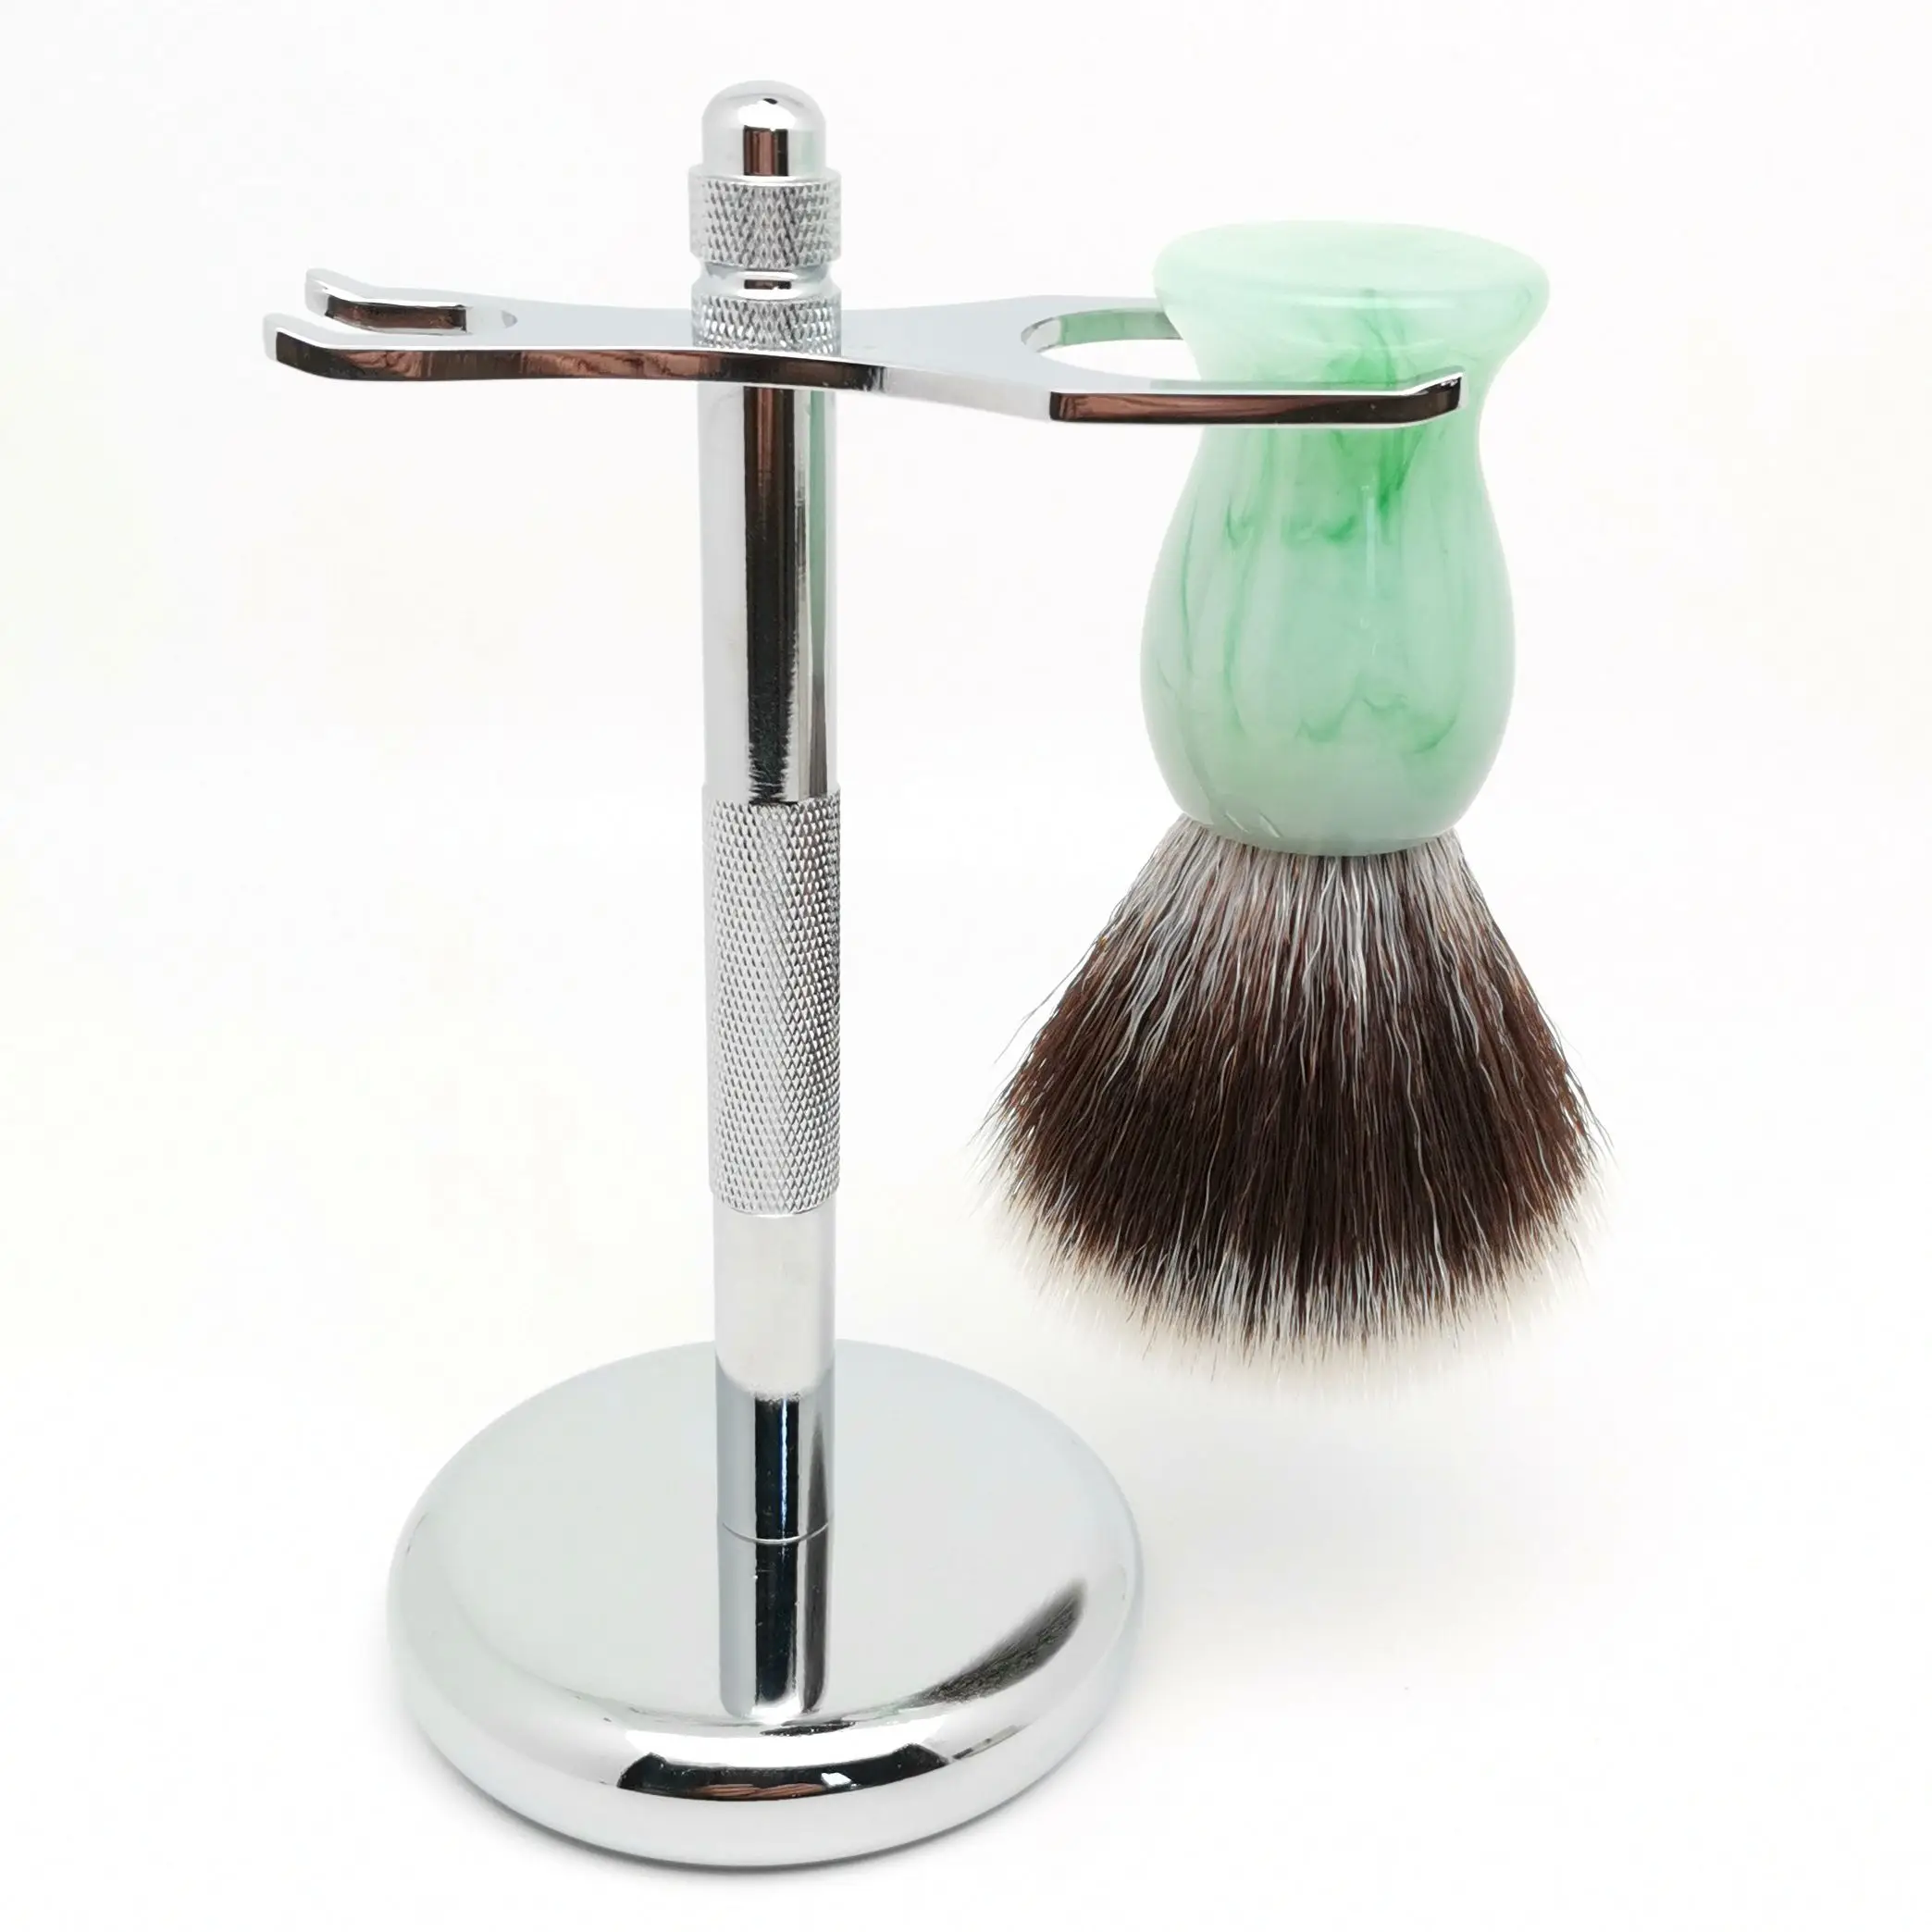 TEYO Synthetic Shaving Brush and Shaving Stand Set for Wet Shave Tool